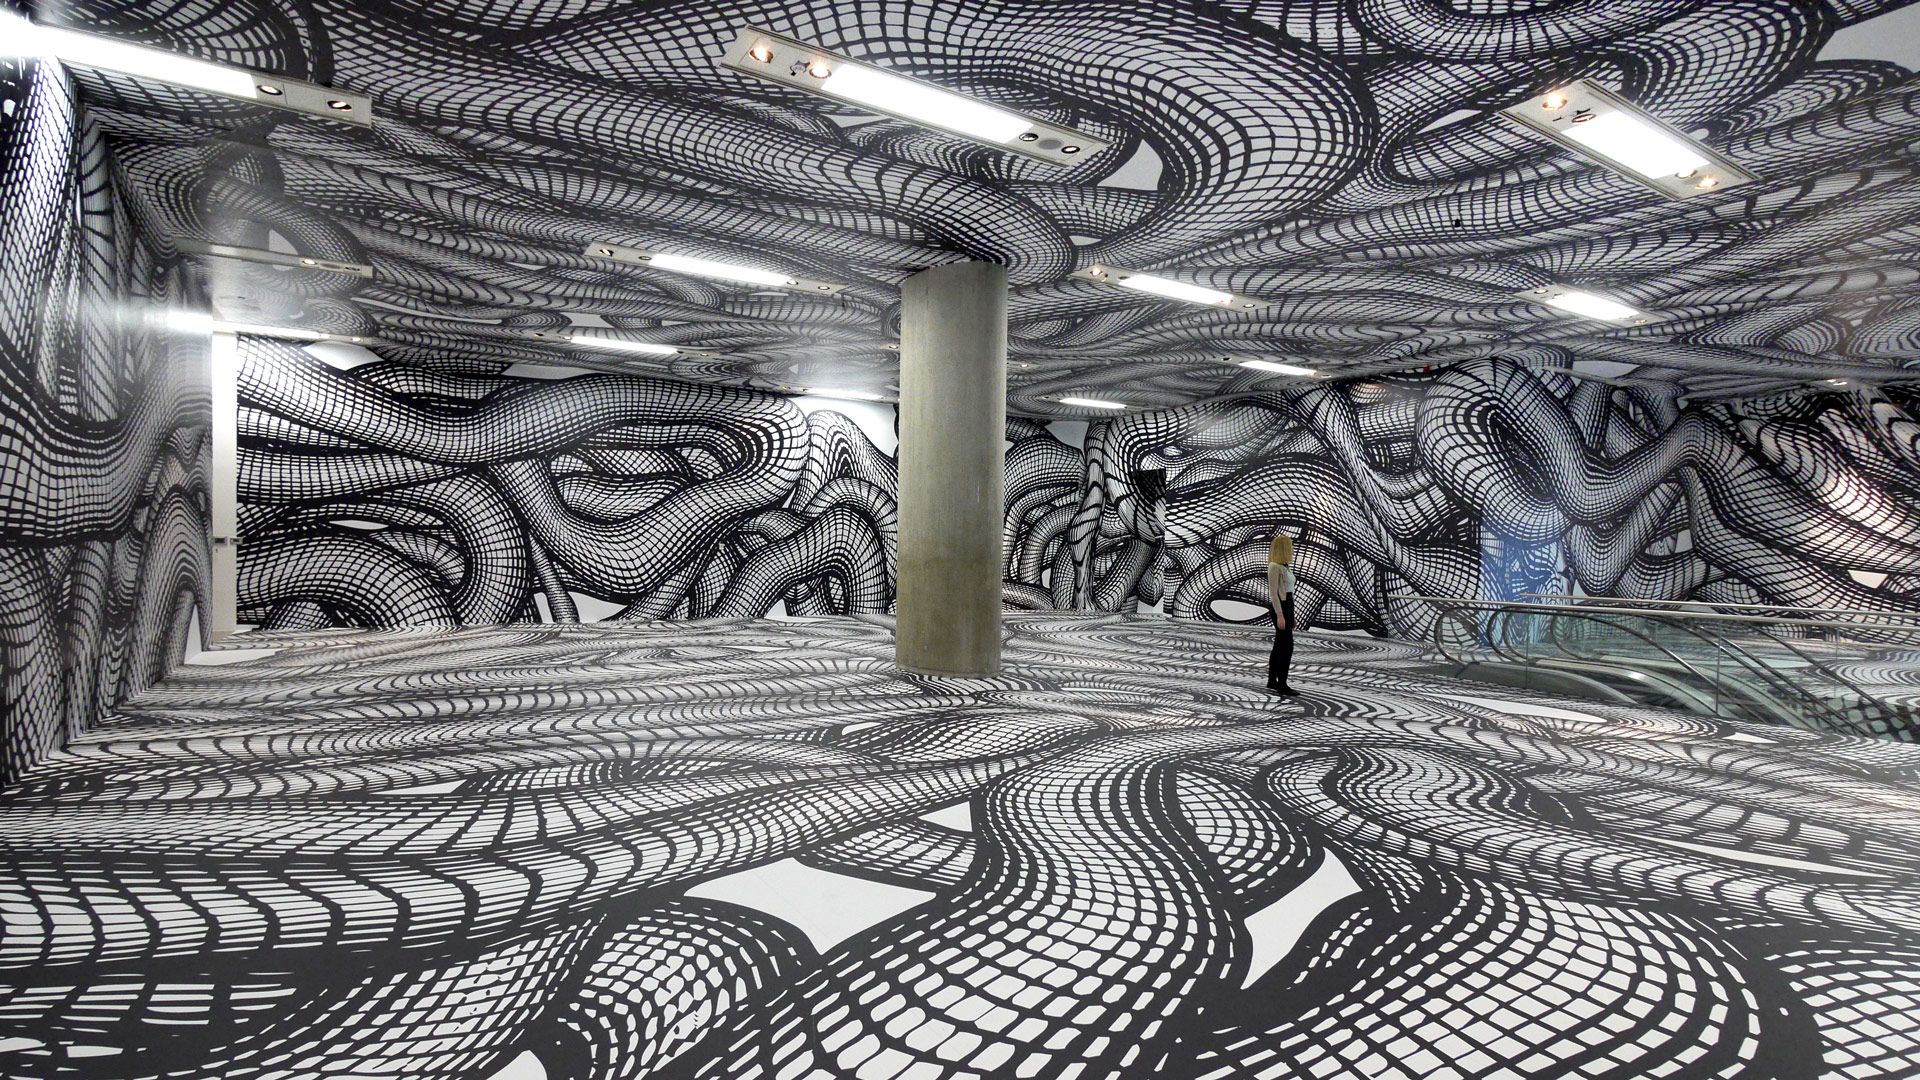 Peter Kogler's Rooms of Illusions - Projection Mapping Central